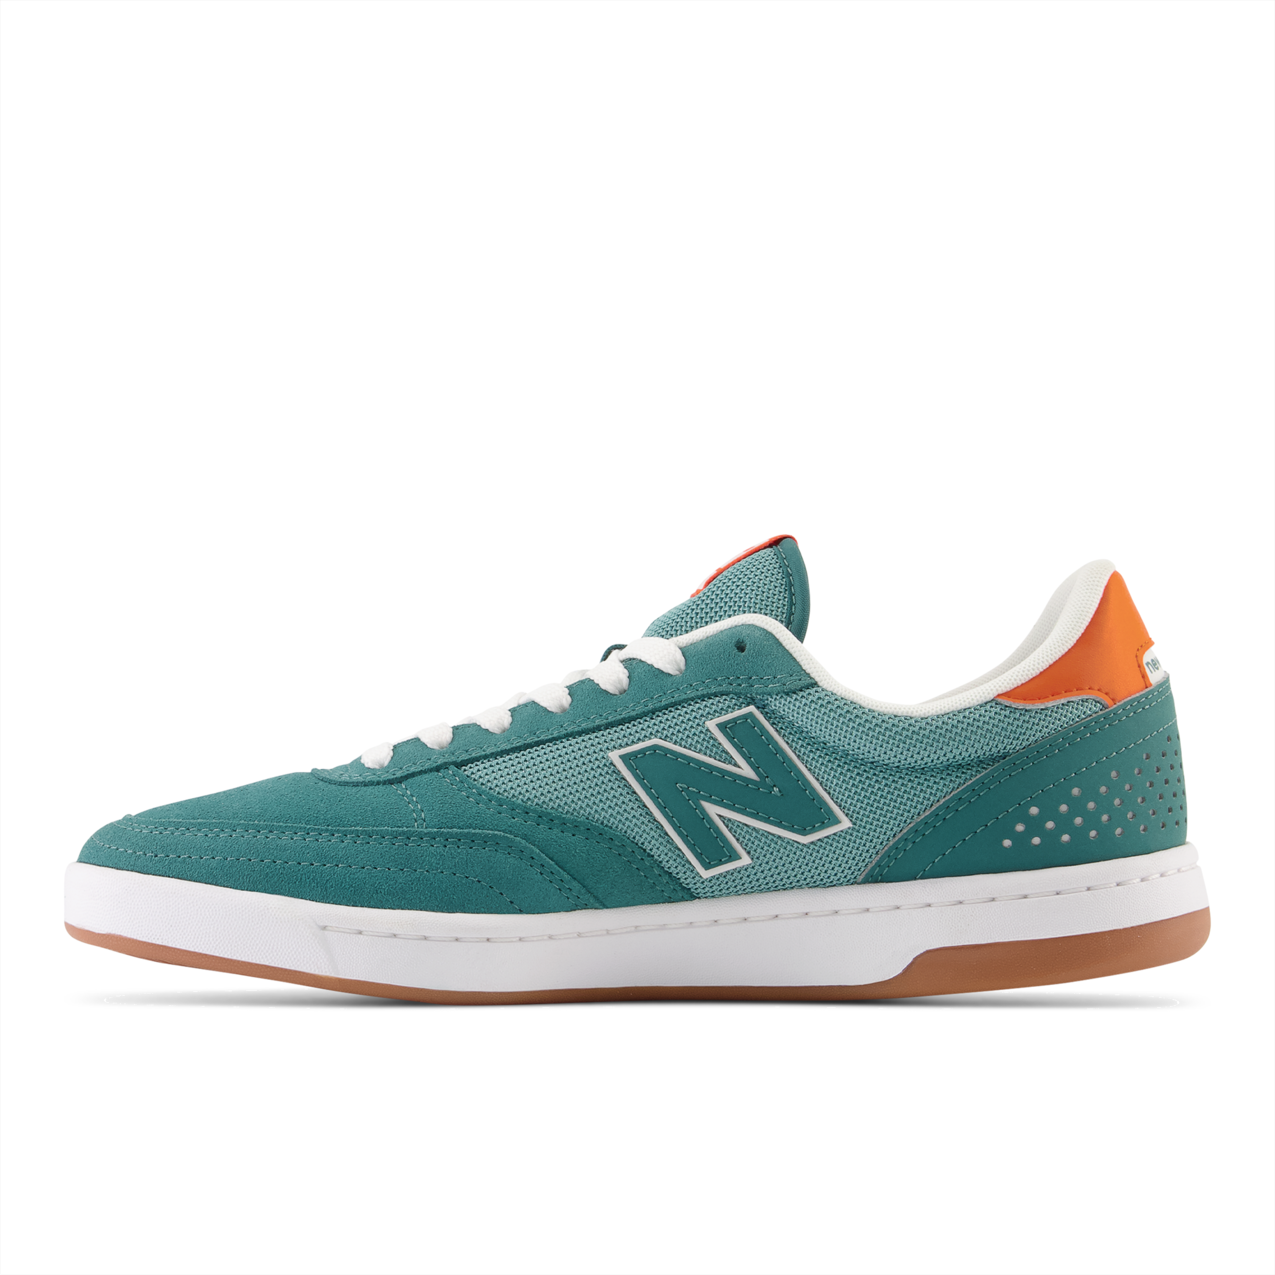 New Balance Numeric Men's 440 Synthetic Teal Orange Shoes